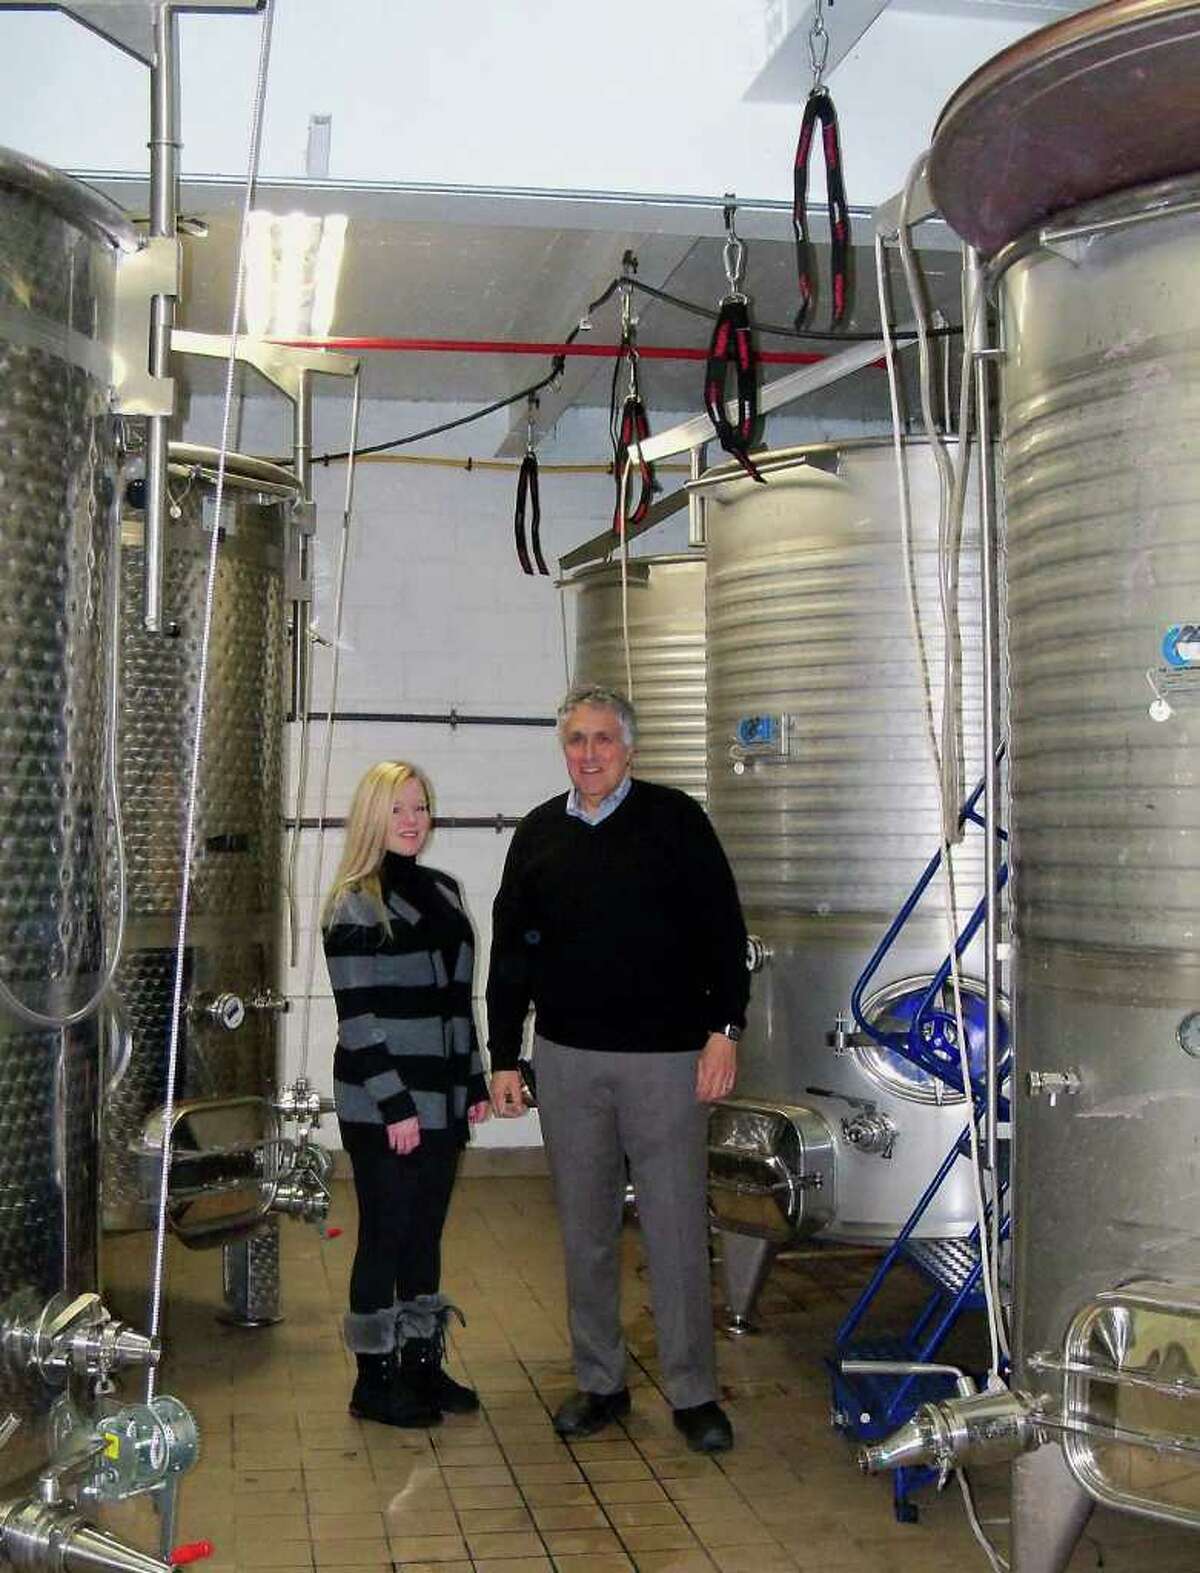 Jessica Beale, left, and Tony Izzo stand amid the large vats used to make wine for Black Rock Vintners, a winery in Bridgeport's Black Rock section owned by Izzo, a Fairfield resident.